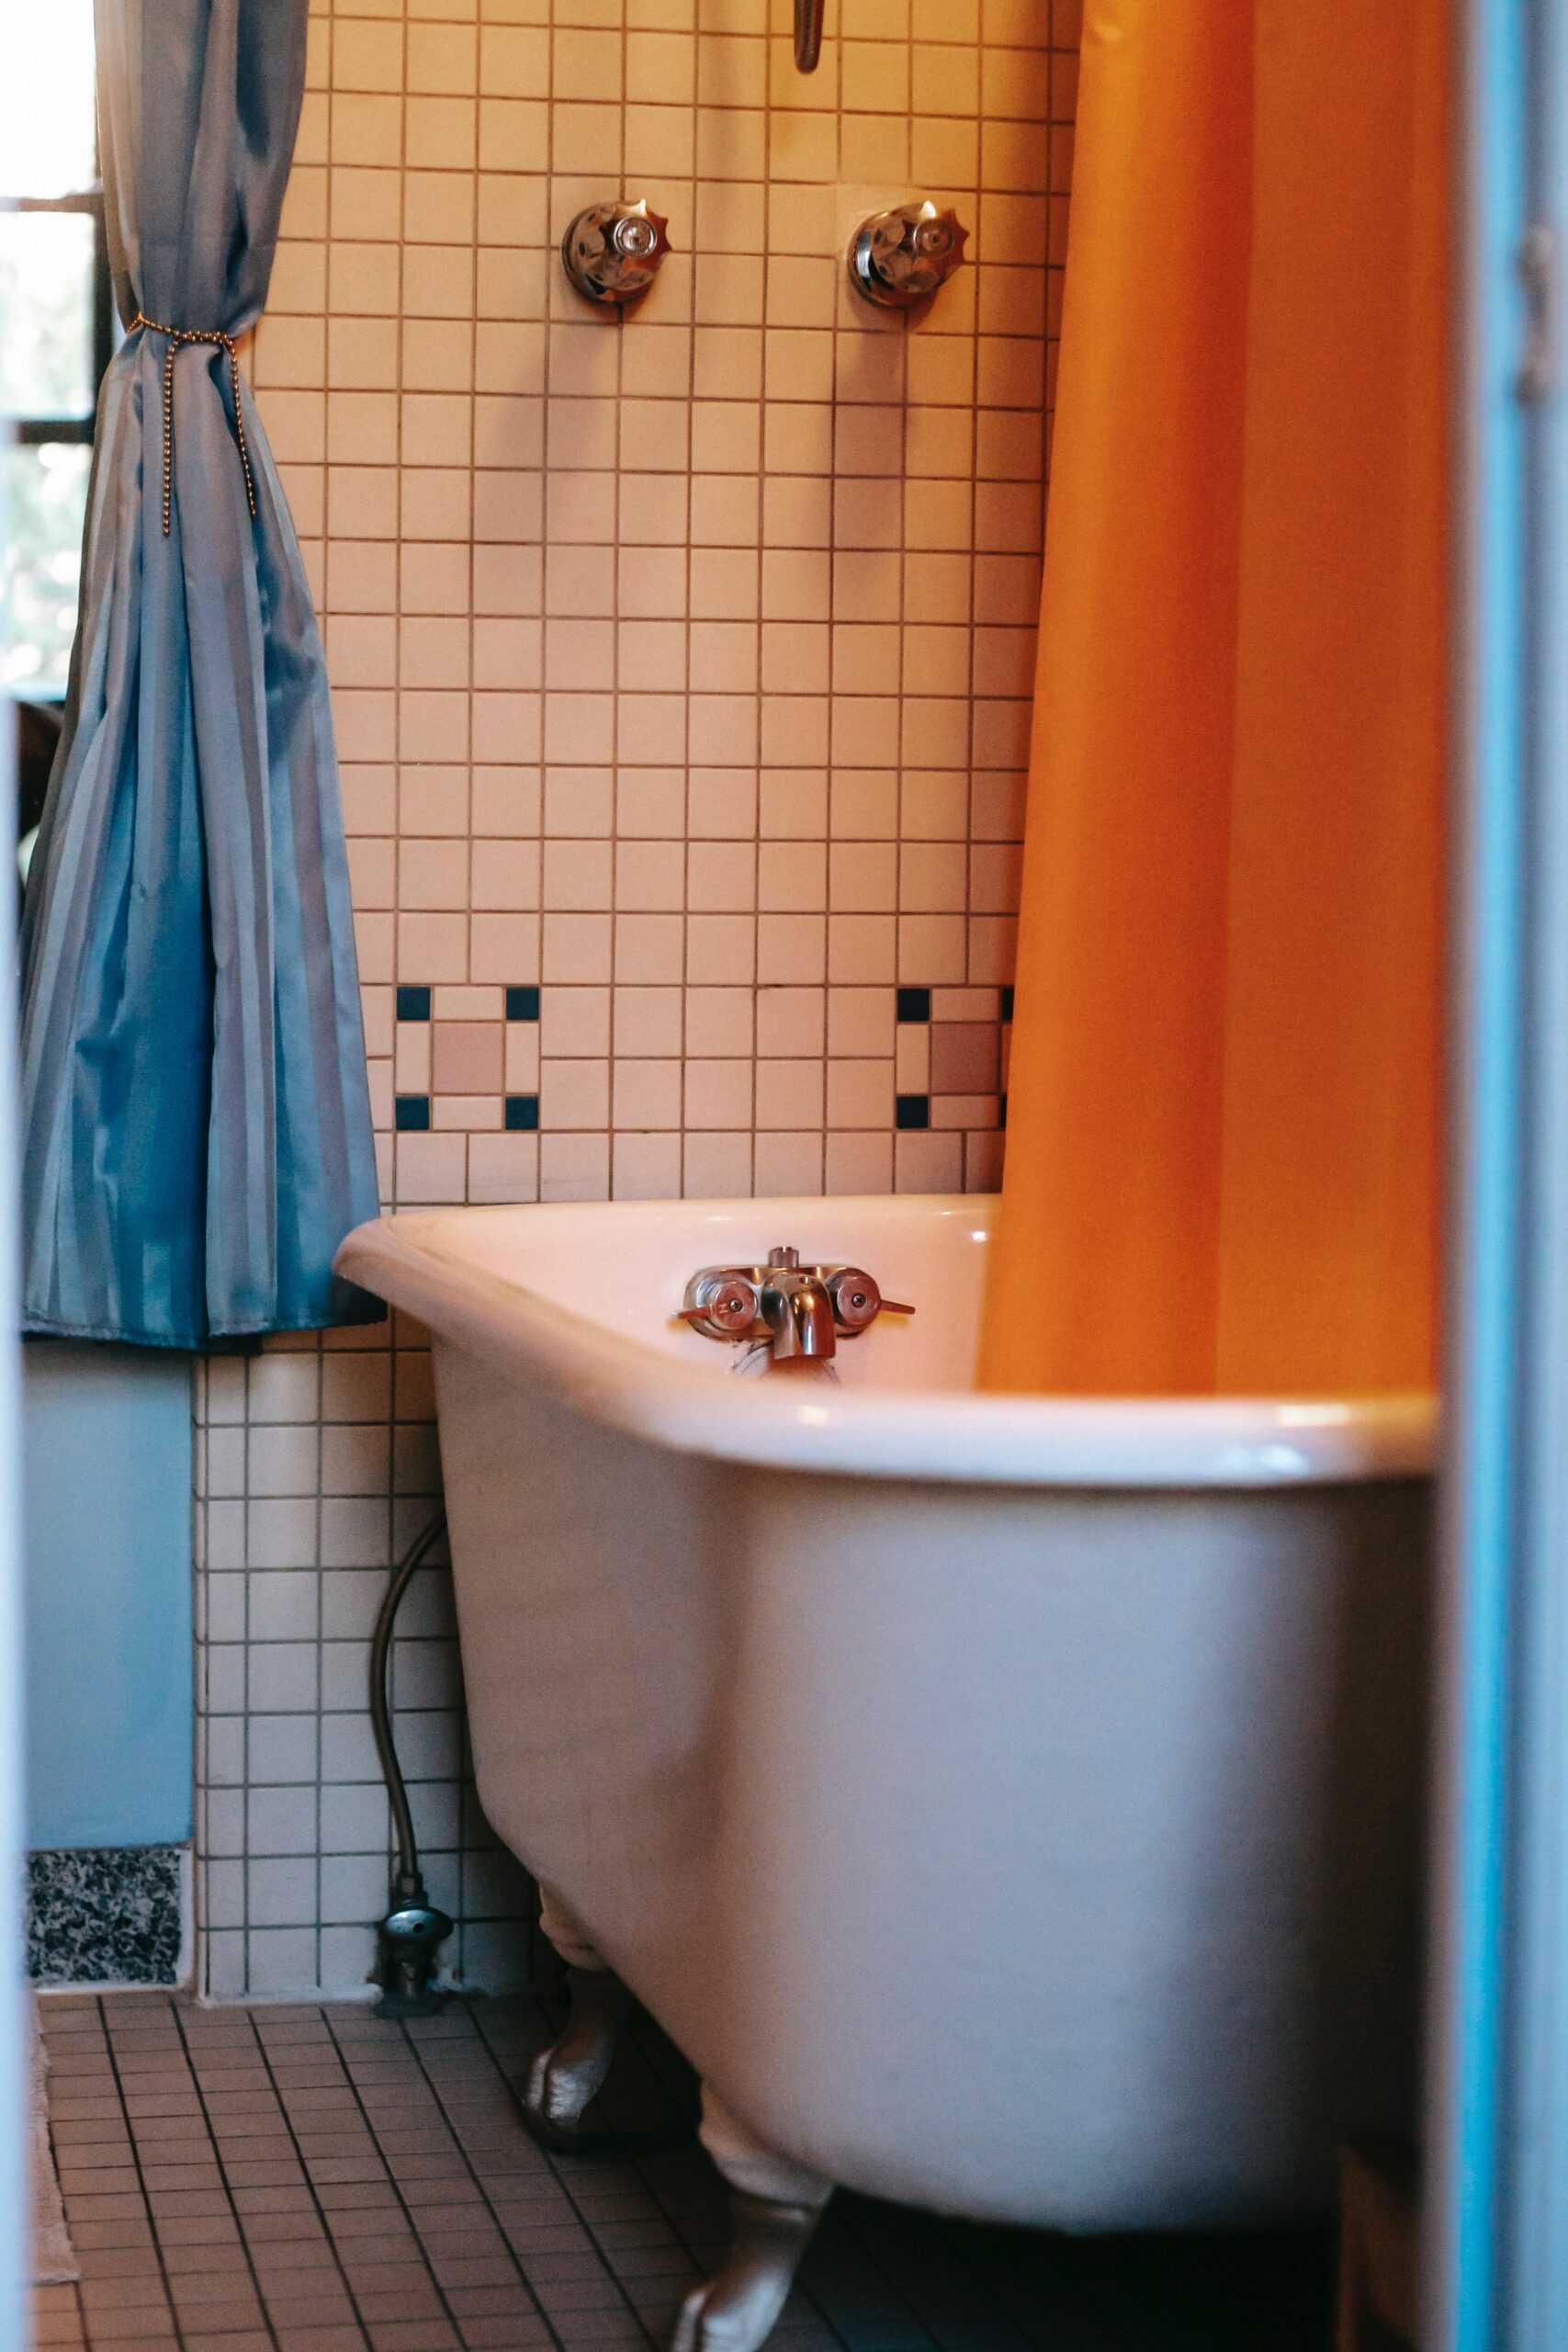 Bathroom Improvements You Can Do On a Budget